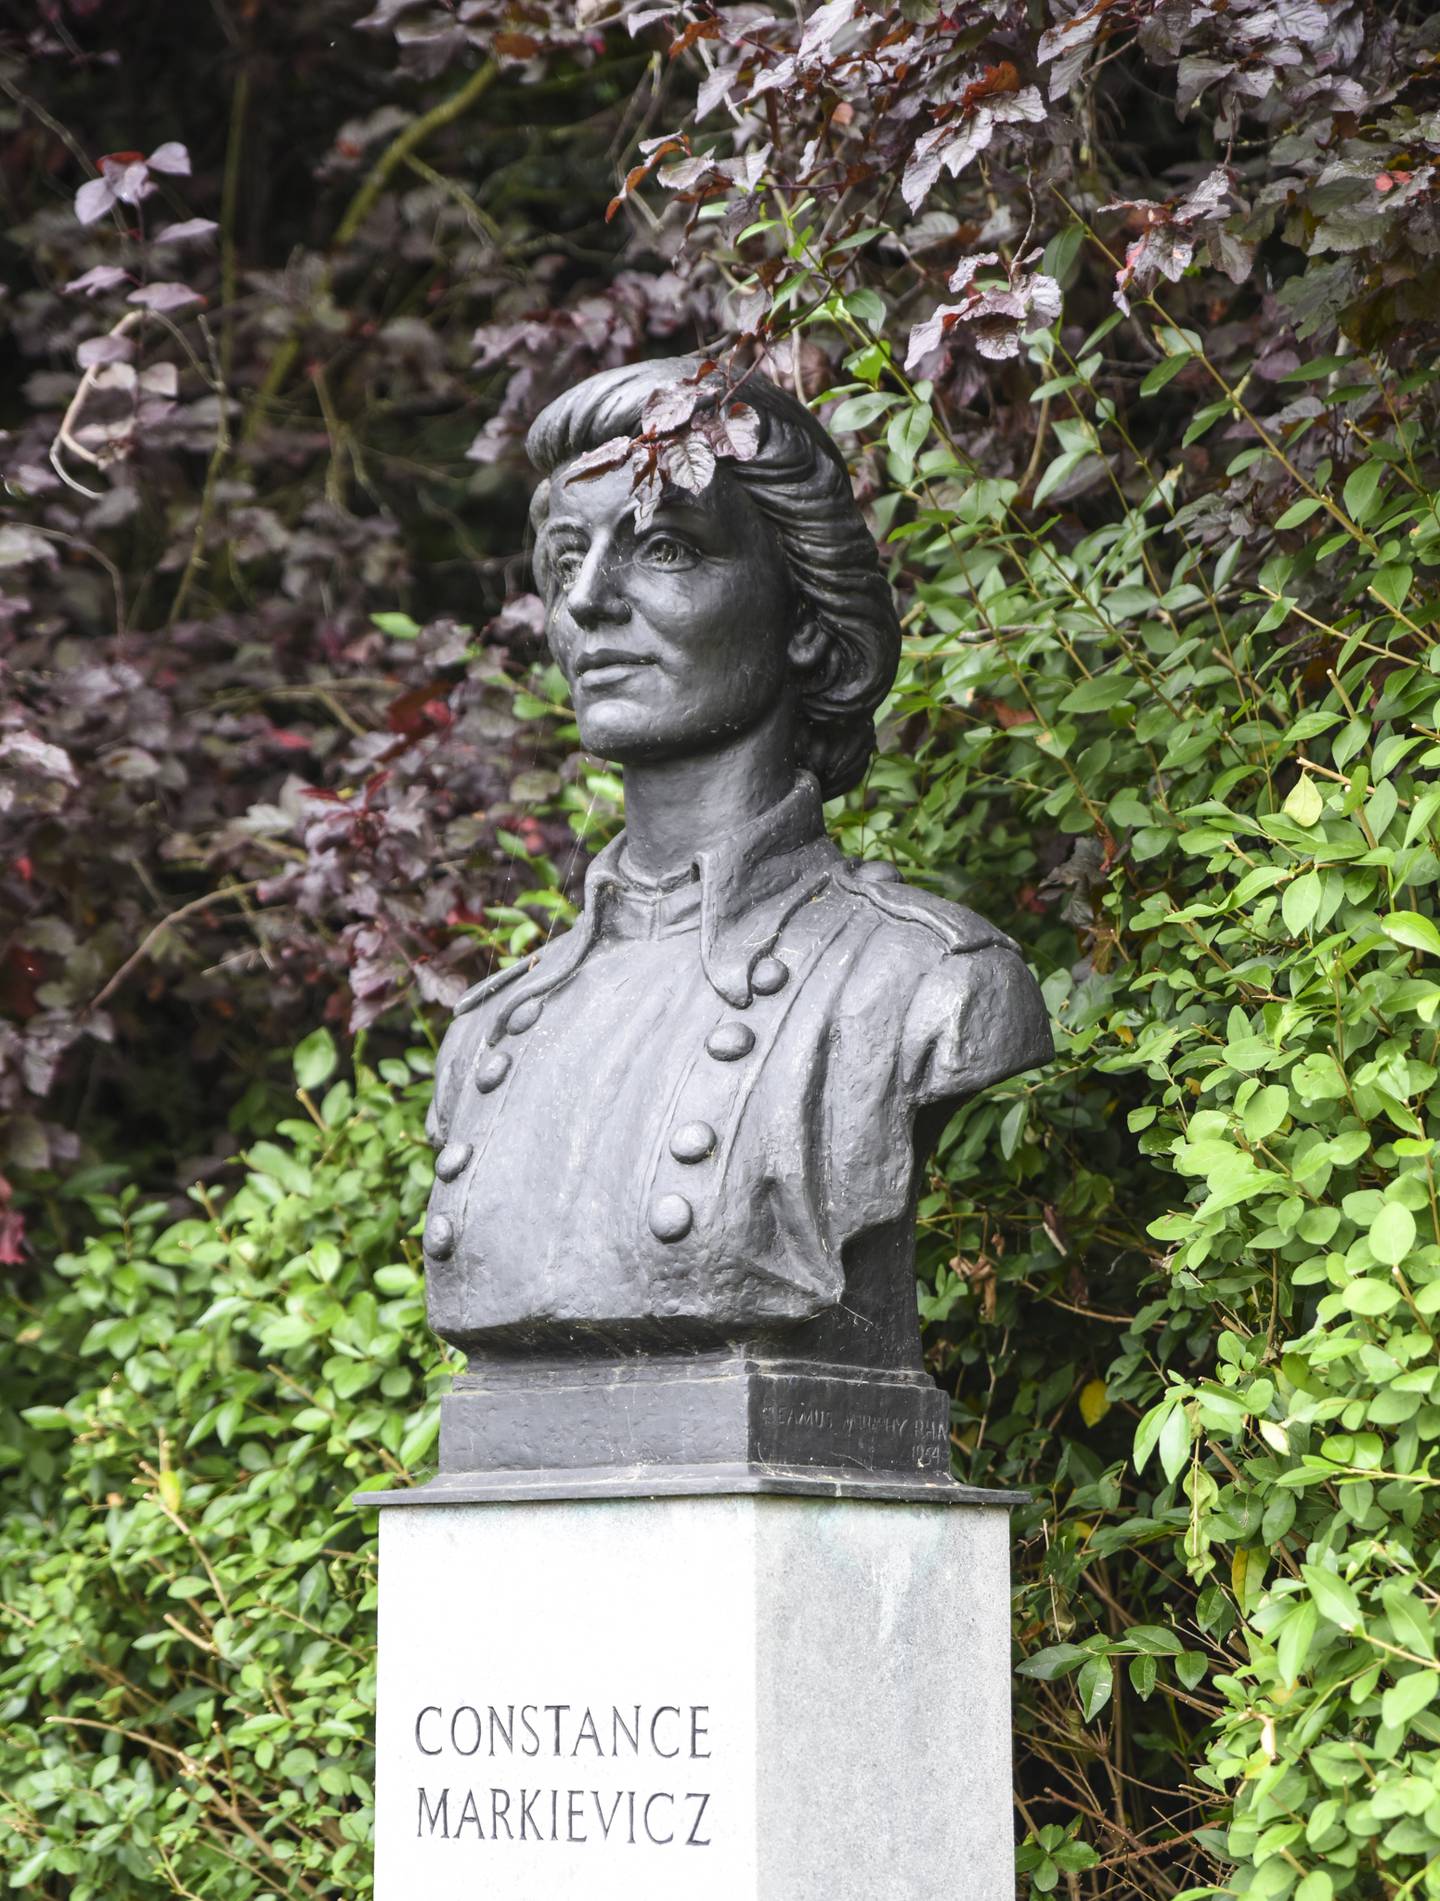 Constance Markievicz was a revered Irish activist. Photo: Ronan O'Connell